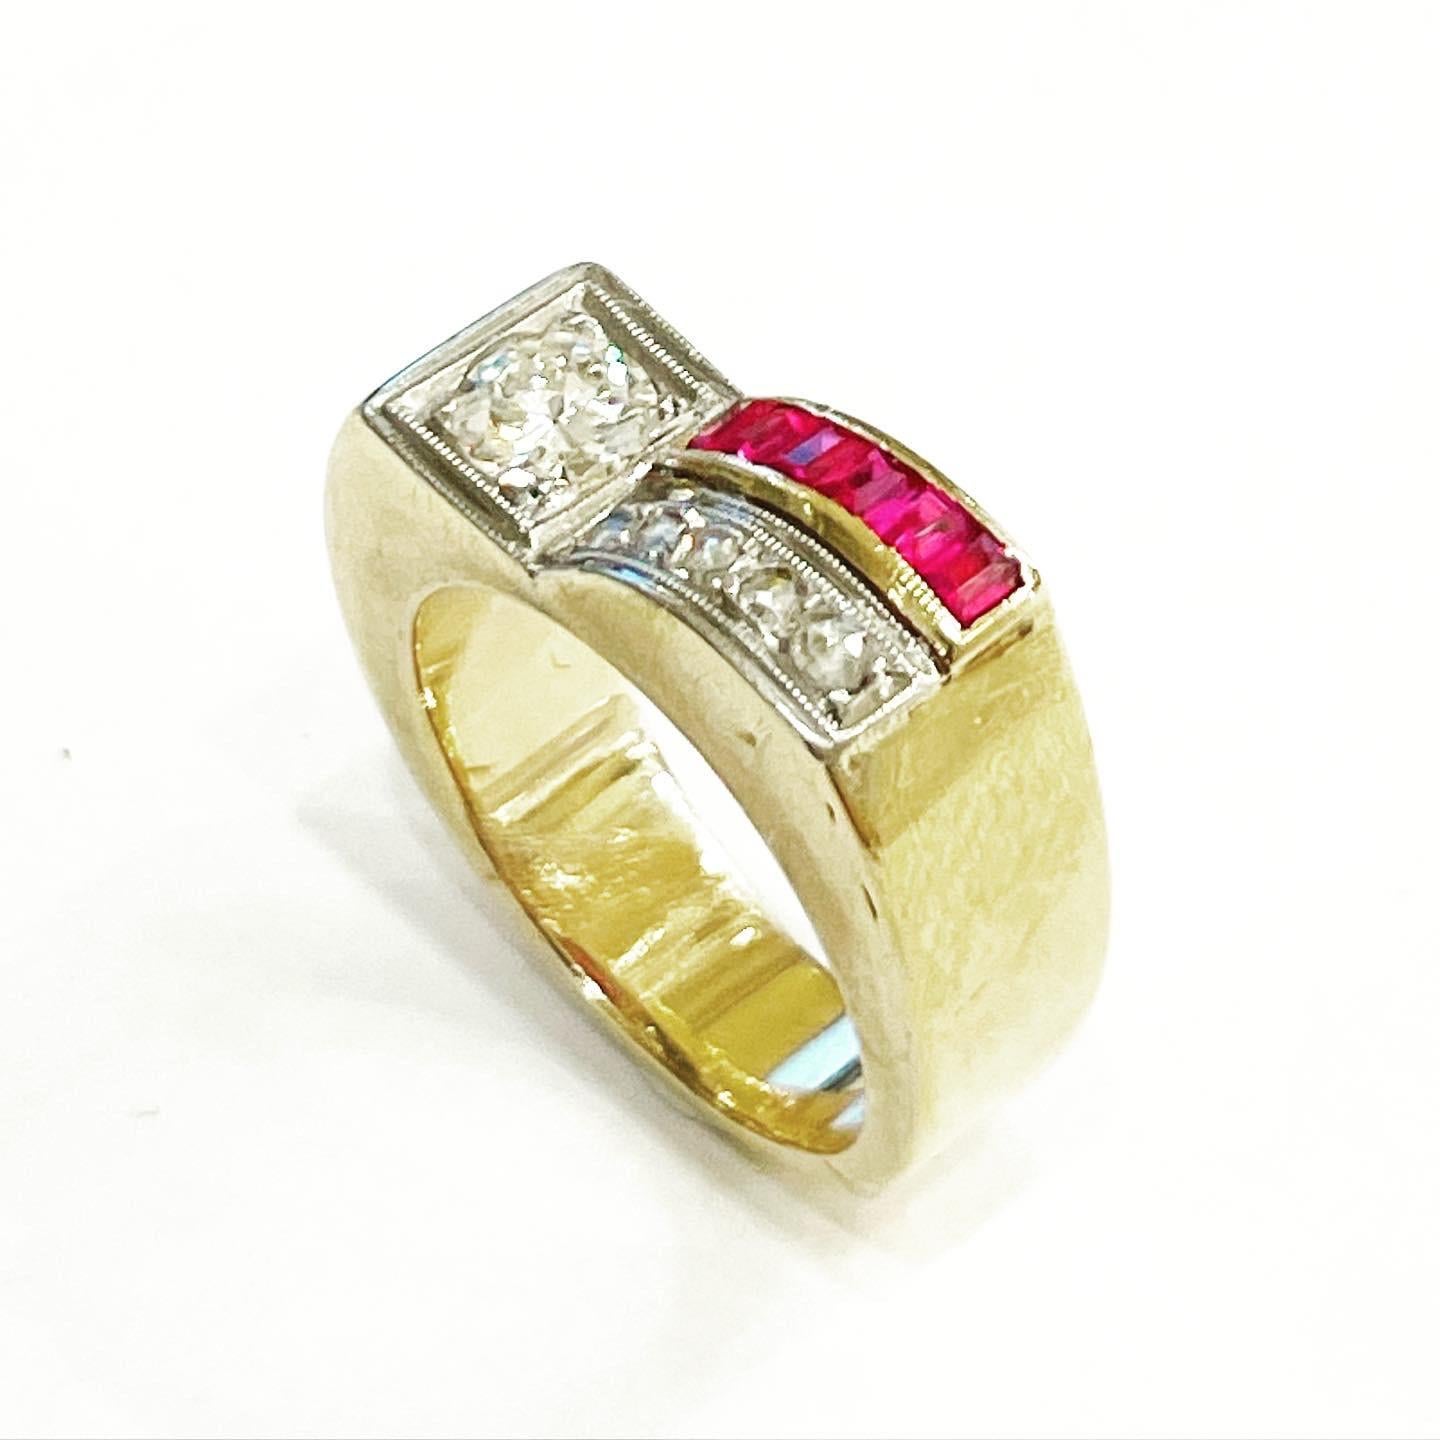 Superb tank ring, linear and geometrical design typical for this period.
Ring in 18 karat yellow  gold, diamonds and rubies.
Circa 1935-1940.
Old European diamond cut and calibrated cut rubies.
Total approximate weight of the diamonds:  main diamond